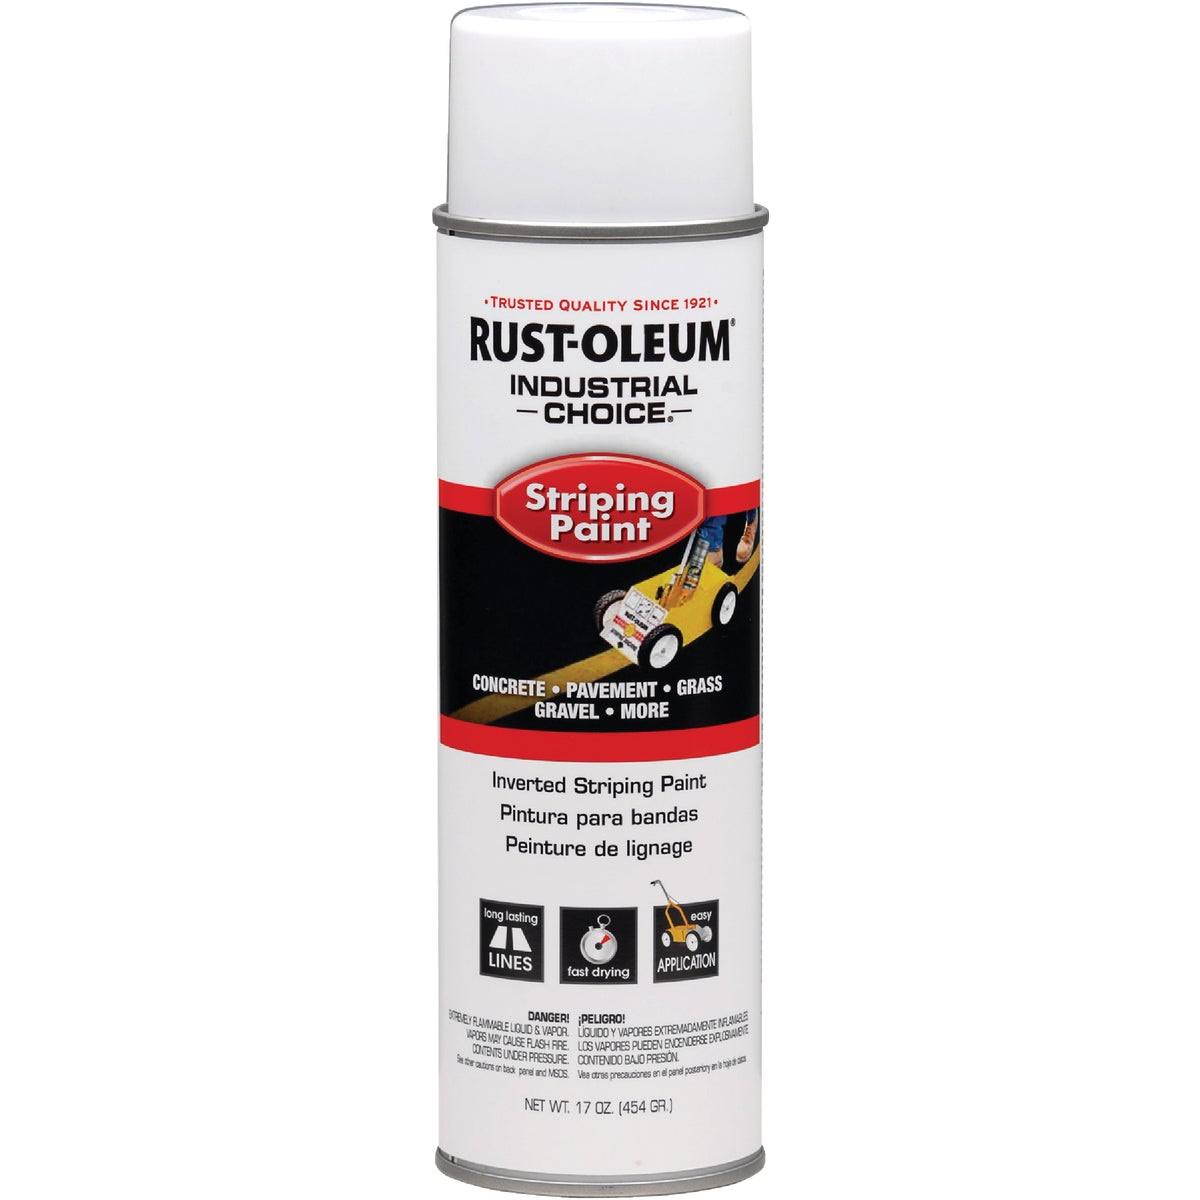 Rust-oleum Industrial Choice Striping Paint - White, 454g